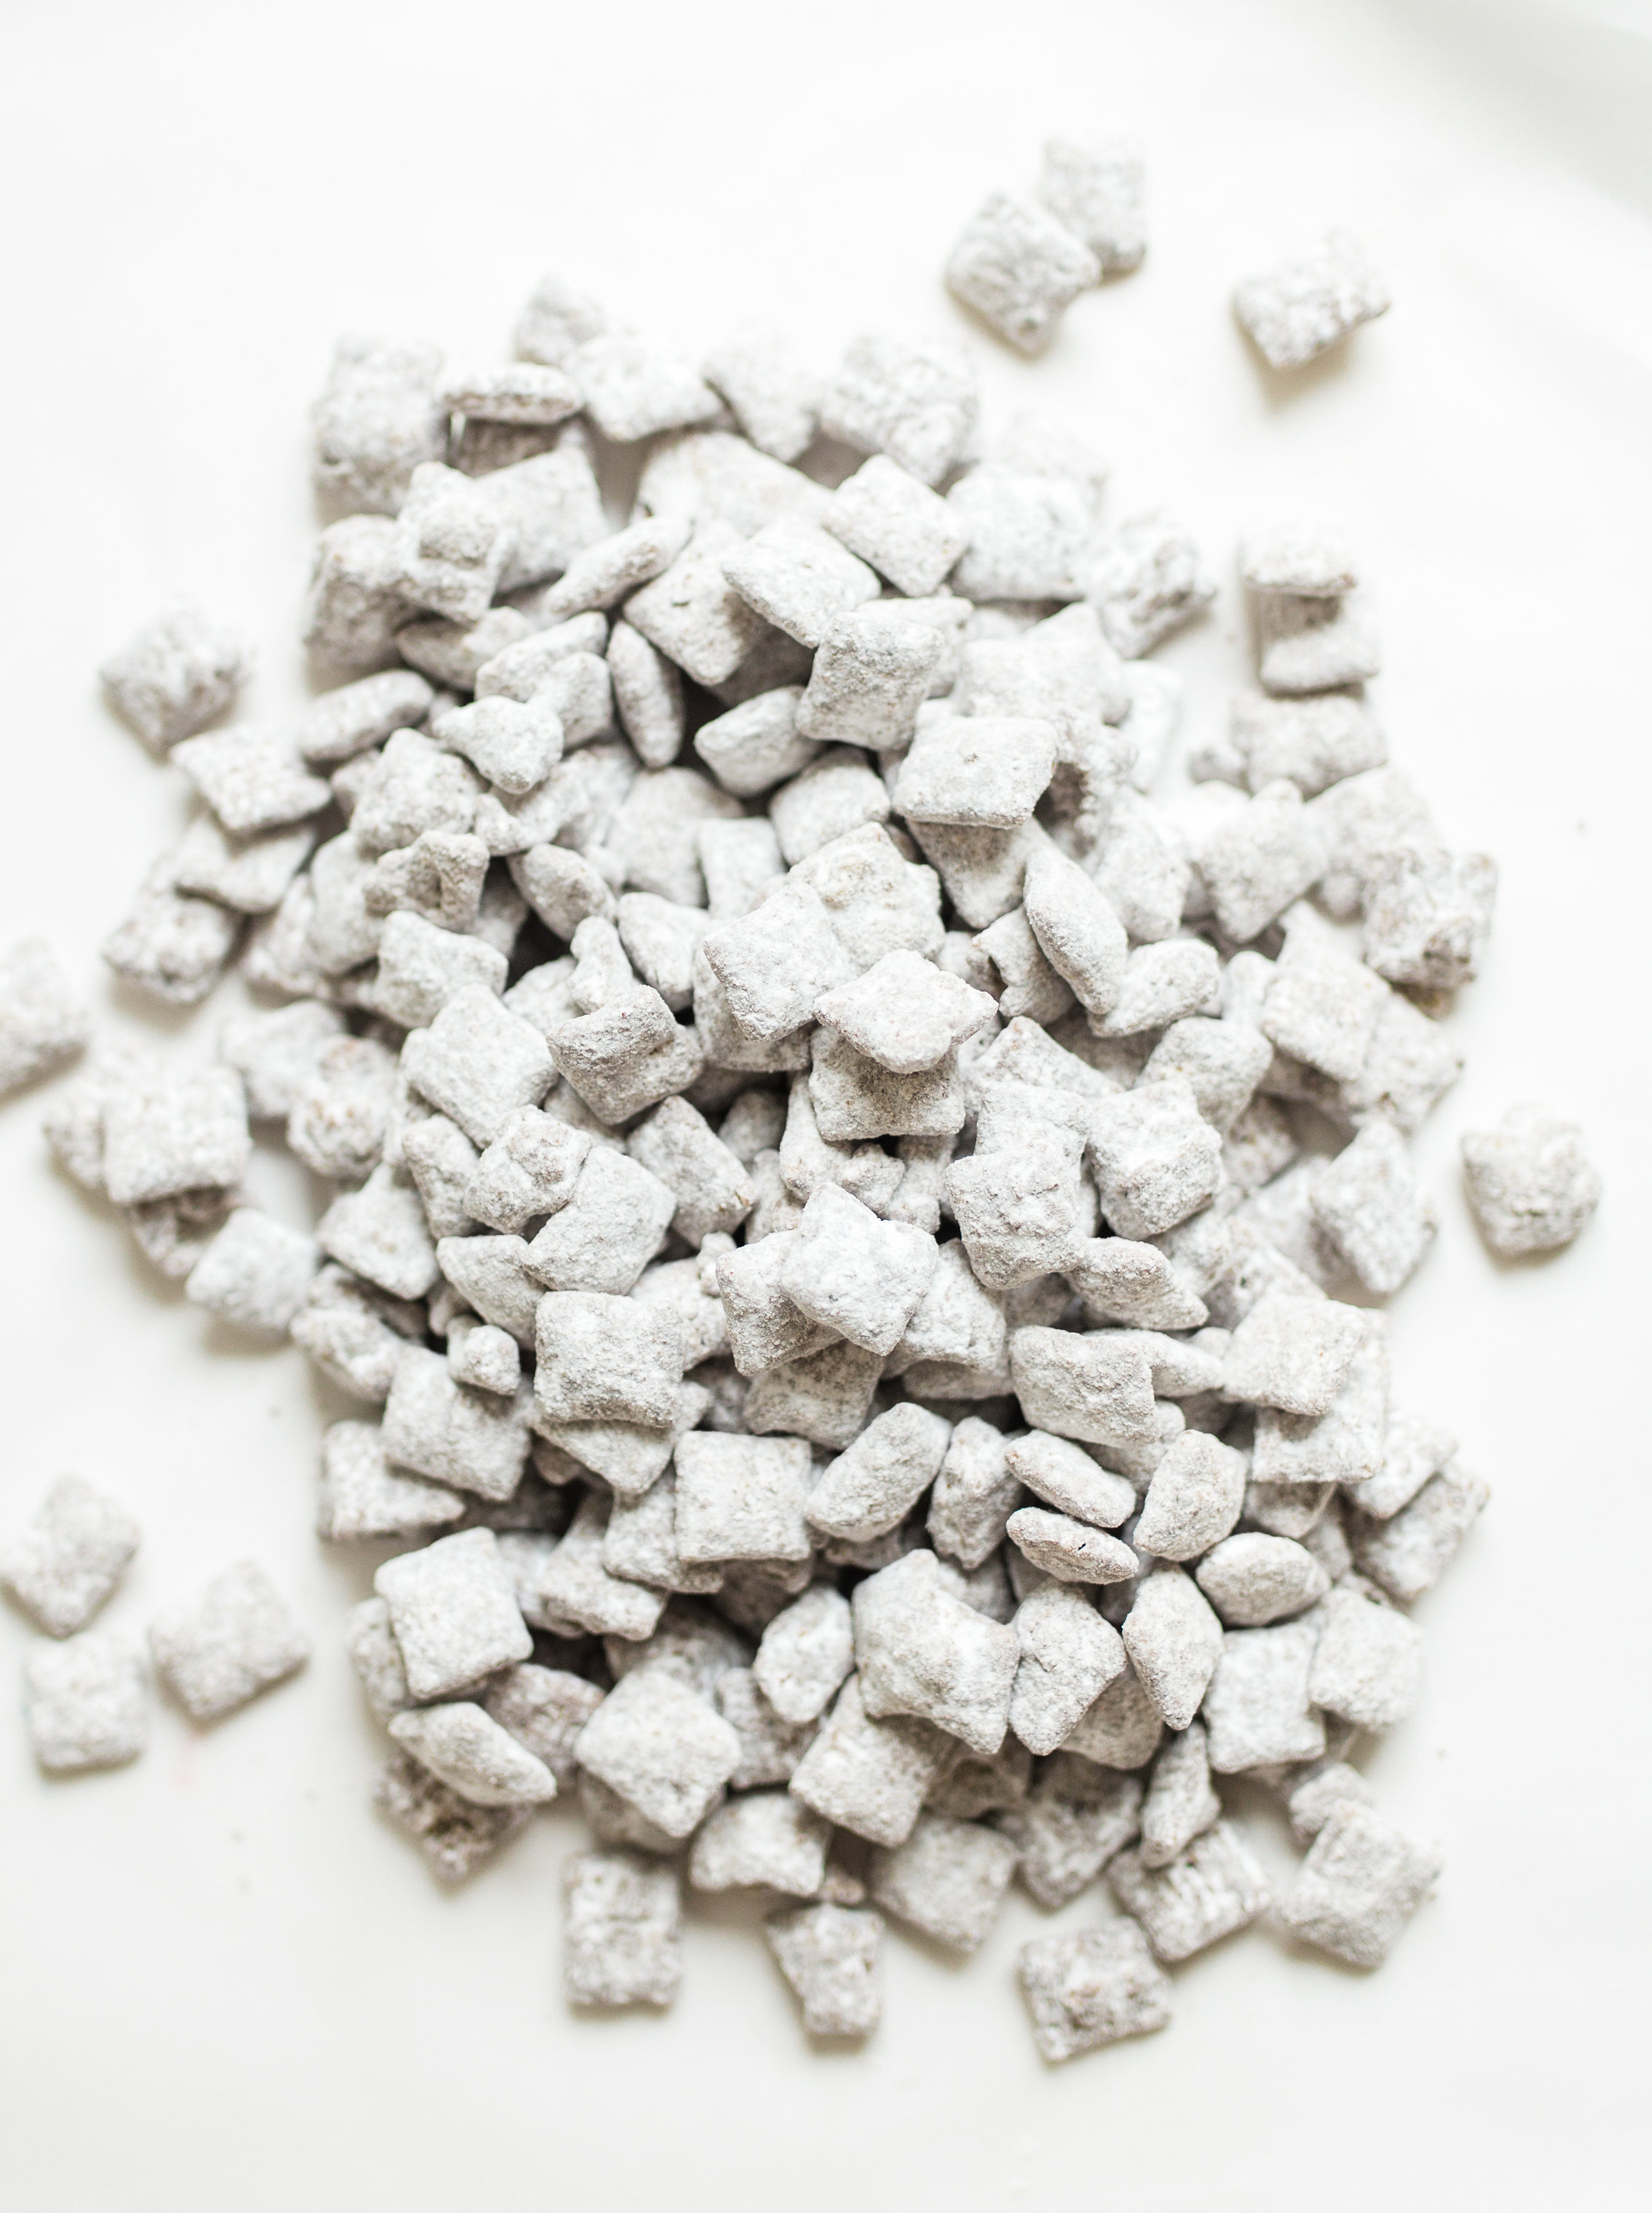 Positively addictive classic Puppy Chow Muddy Buddies - comes together in minutes, is no-bake, and can be made up in big batches - perfect for gifting! Click through for the recipe. #muddybuddies #puppychow #holidaygift #dairyfree #vegan #vegandessert | glitterinc.com | @glitterinc